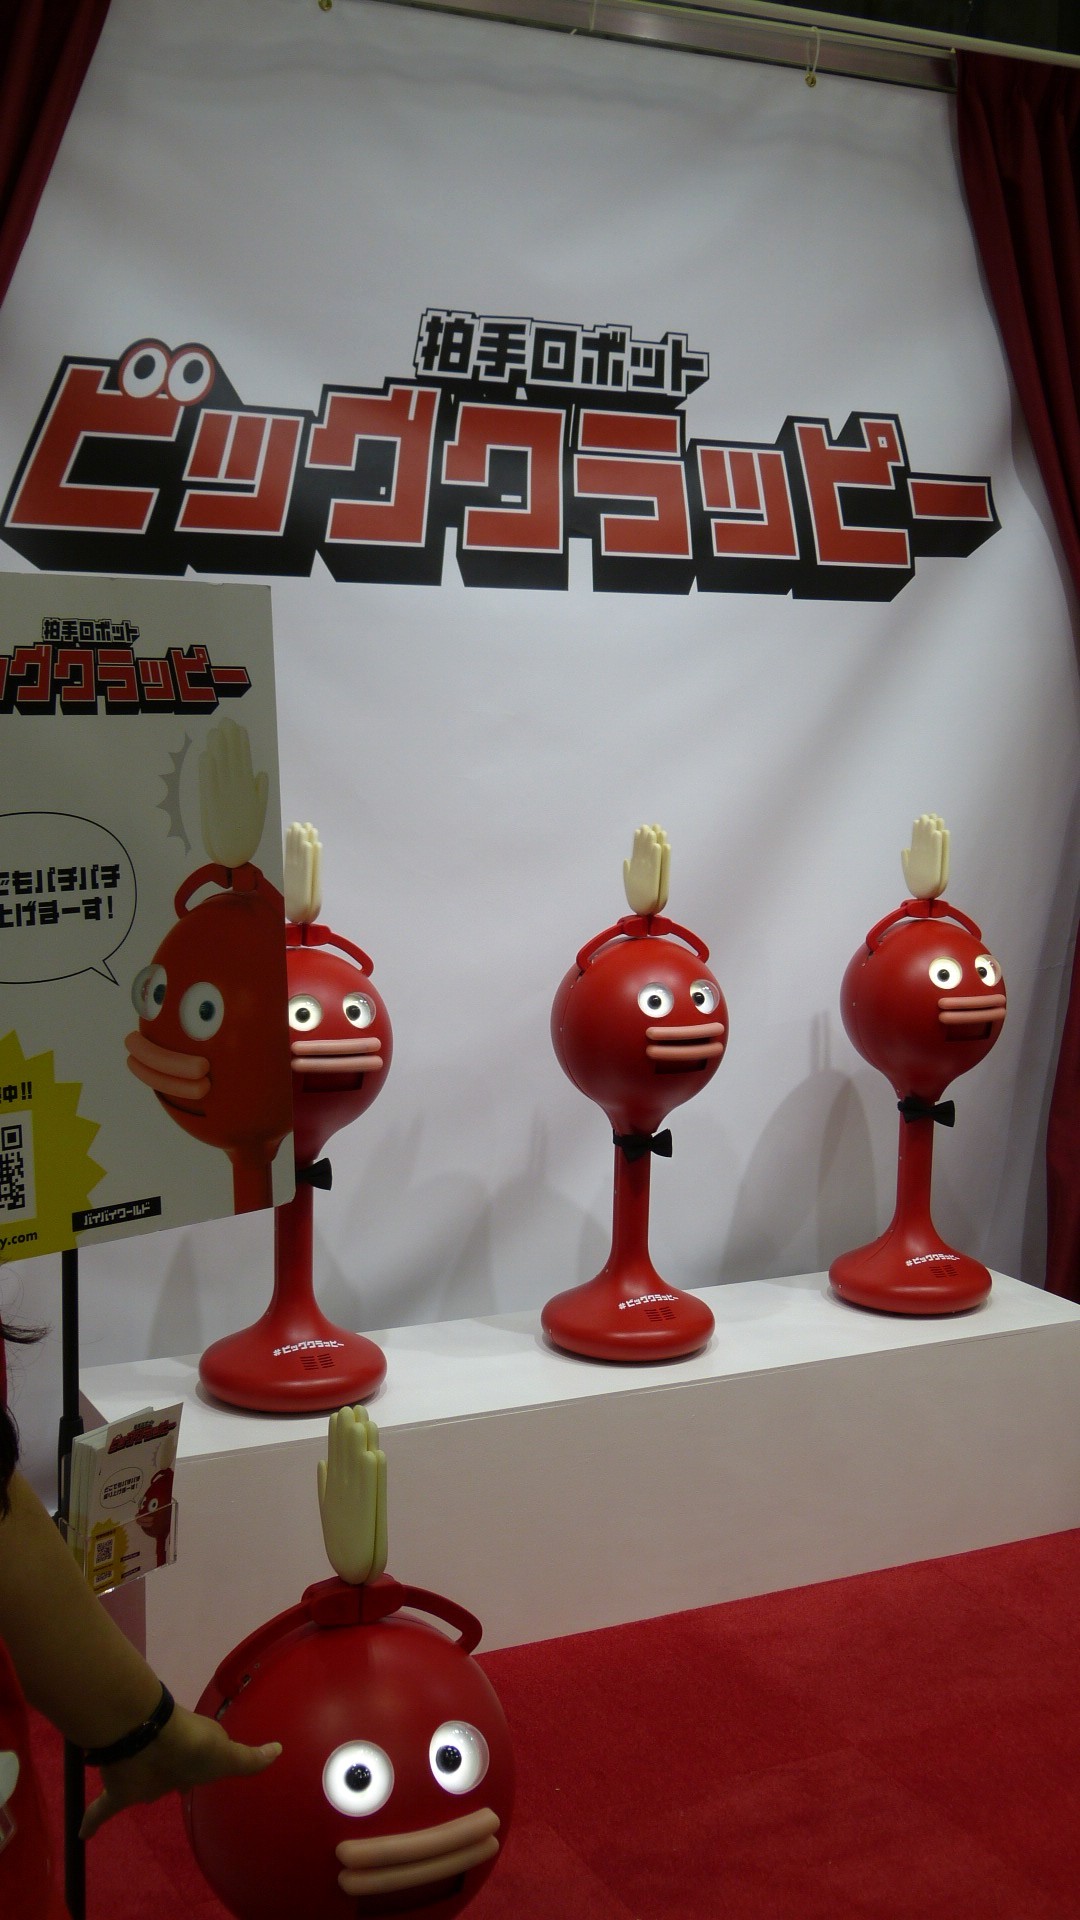 several red robots consisting of a sphere on a base with comical eyes and lips with hands above their heads that clap